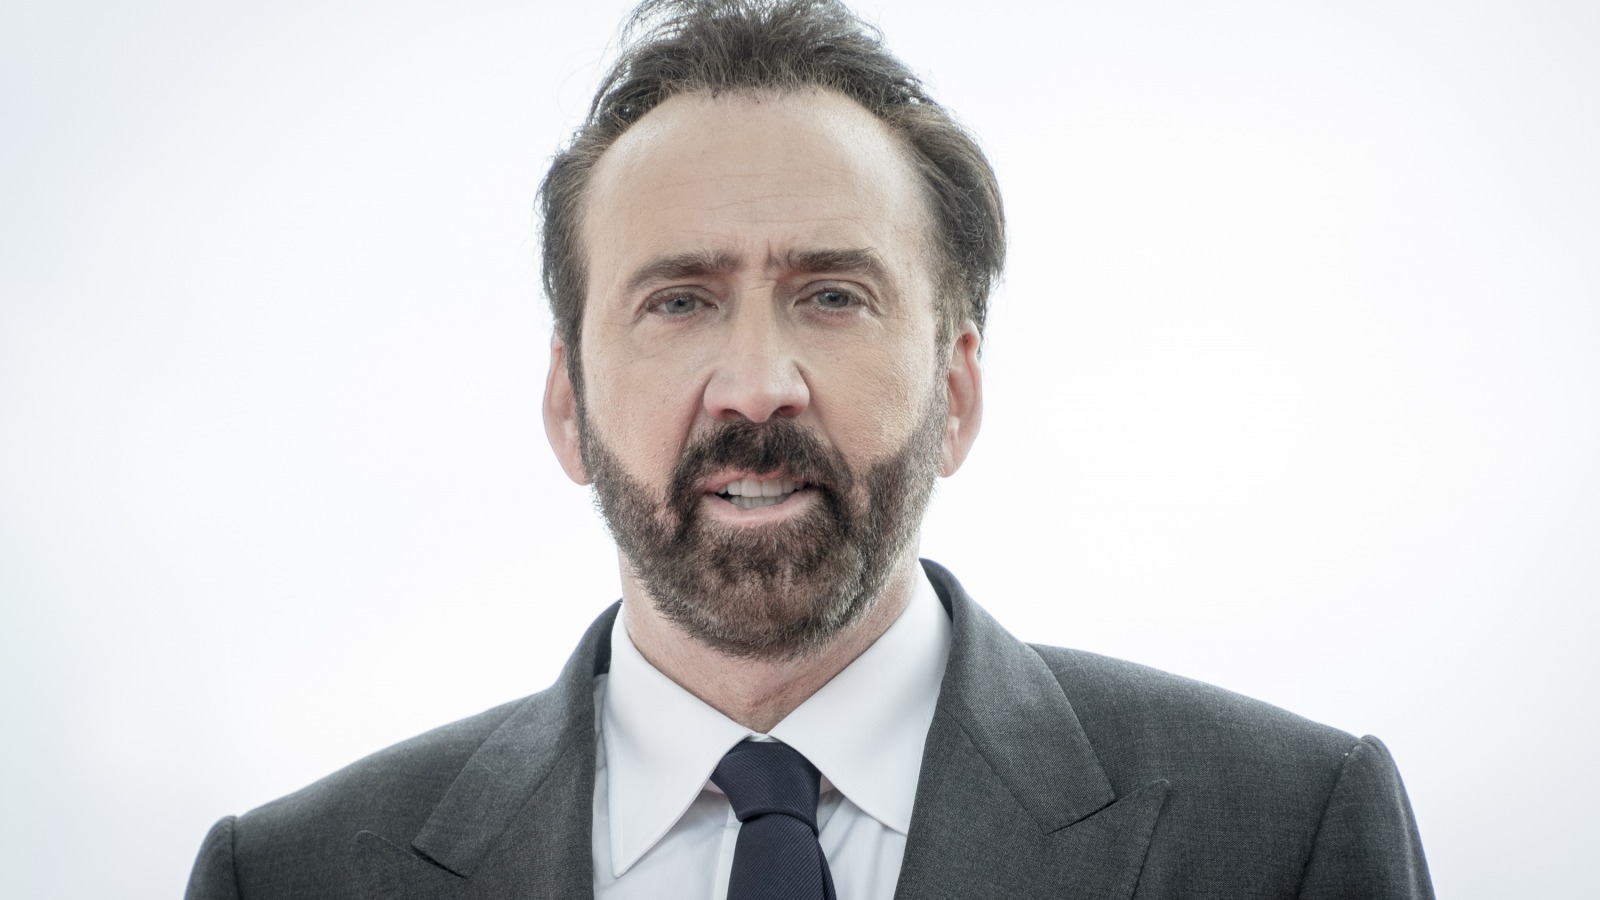 The Best Nicolas Cage Movies According To Rotten Tomatoes